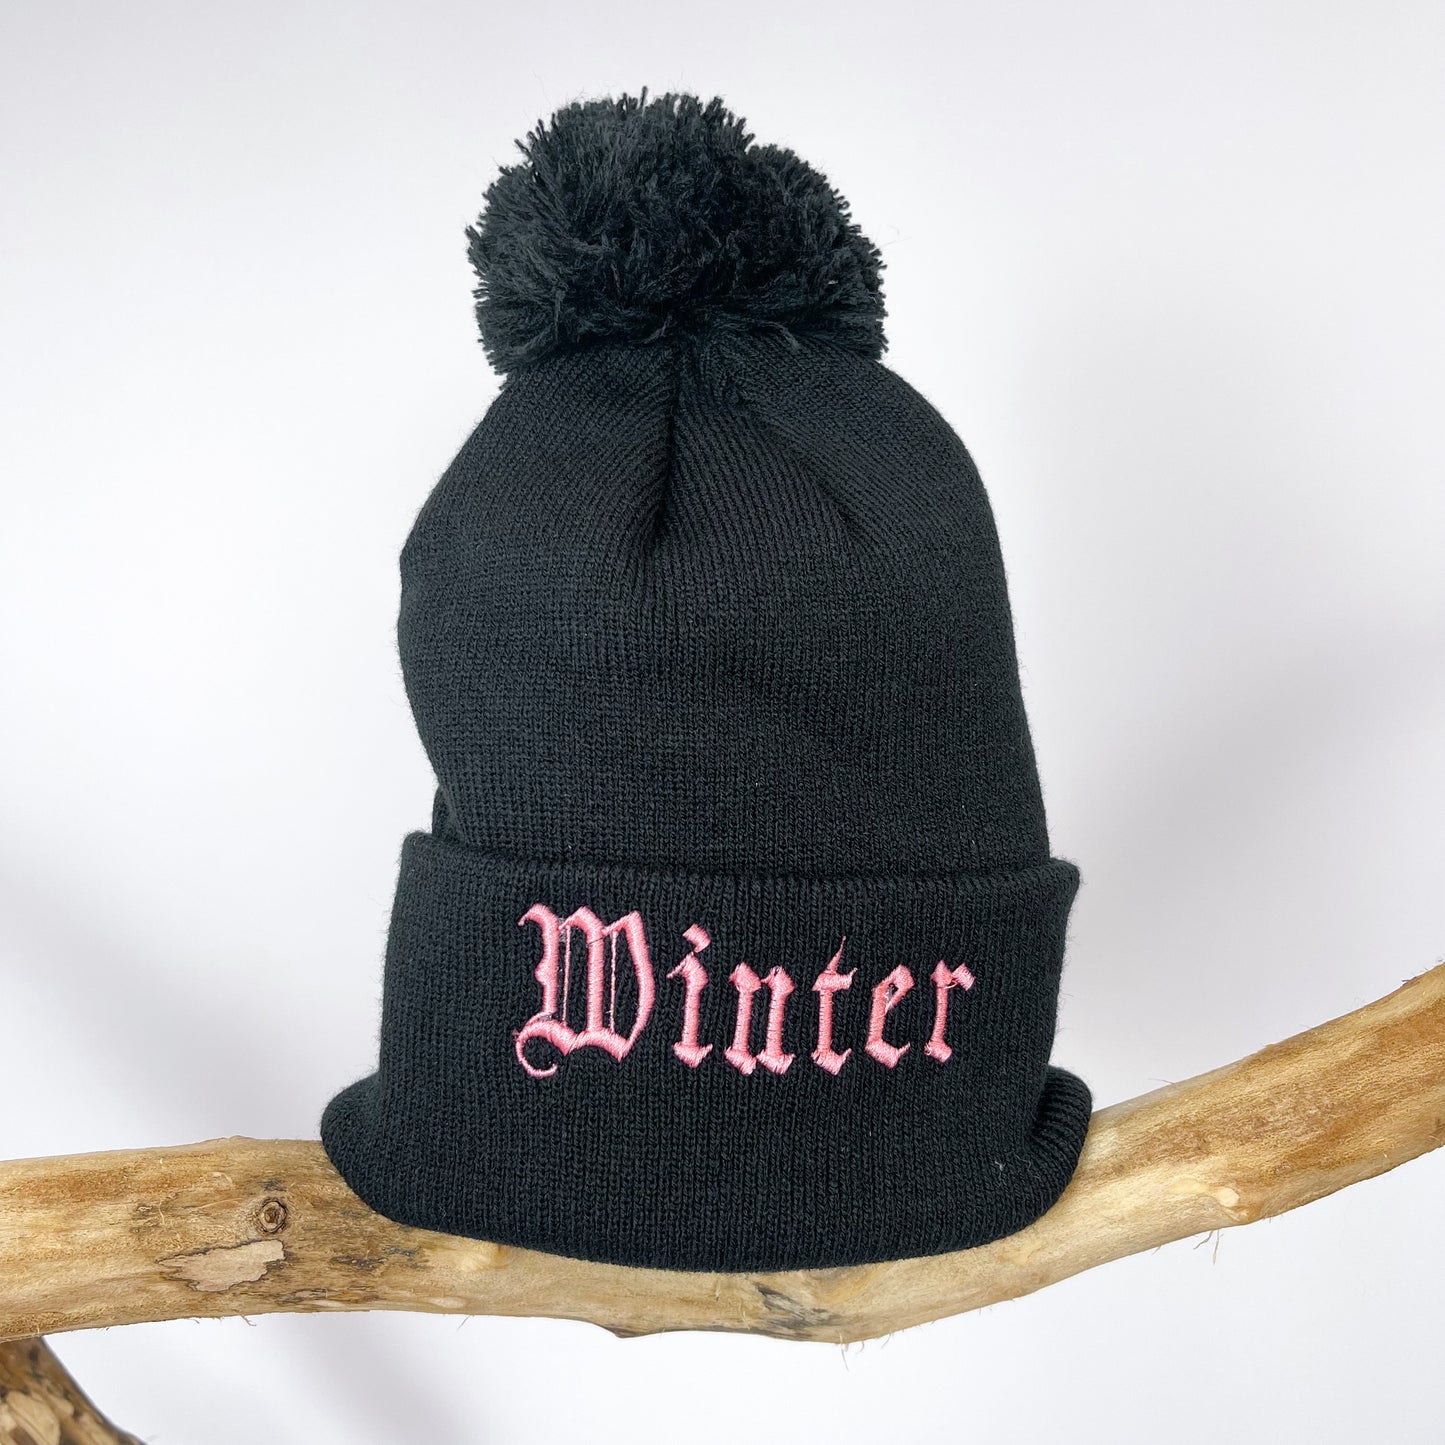 PERSONALISED GOTHIC NAME BOBBLE KNIT HAT